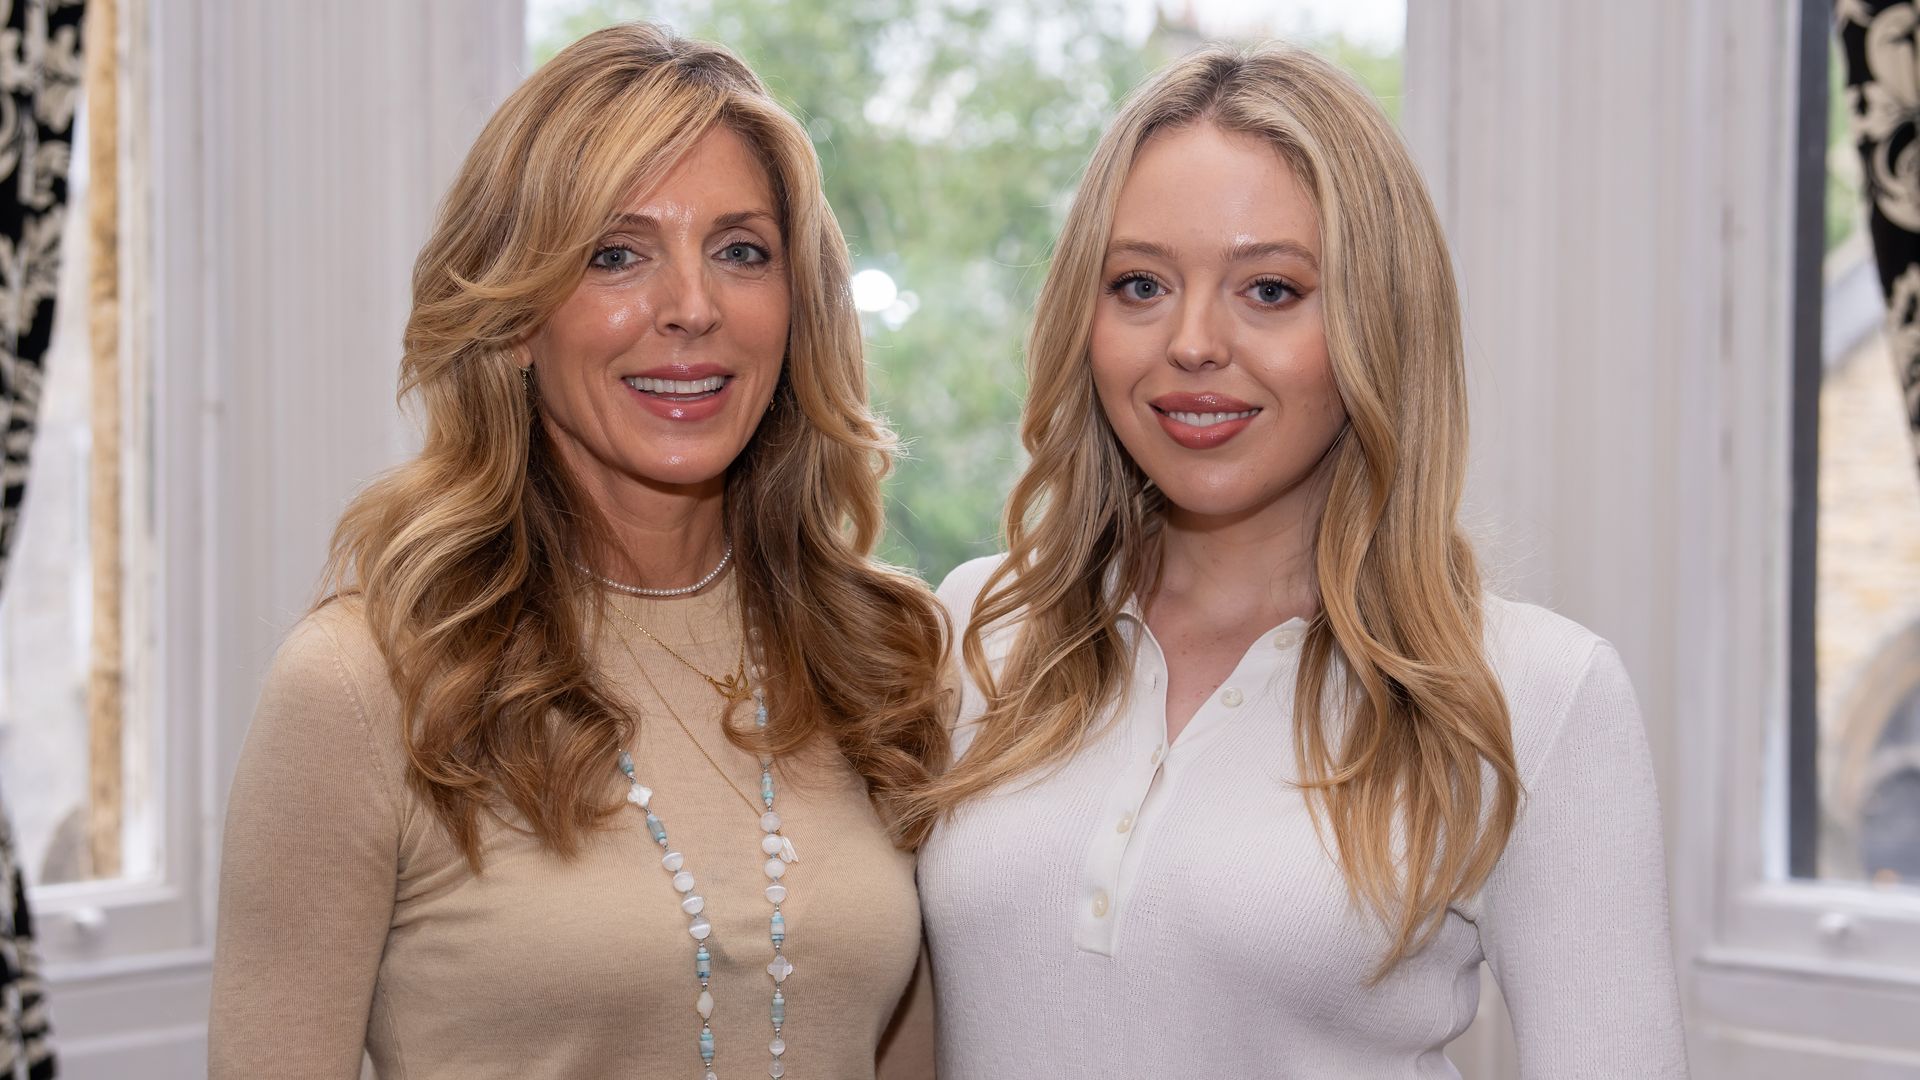 Tiffany Trump and her mom Marla Maples focus on 'healing' after the death of her grandfather